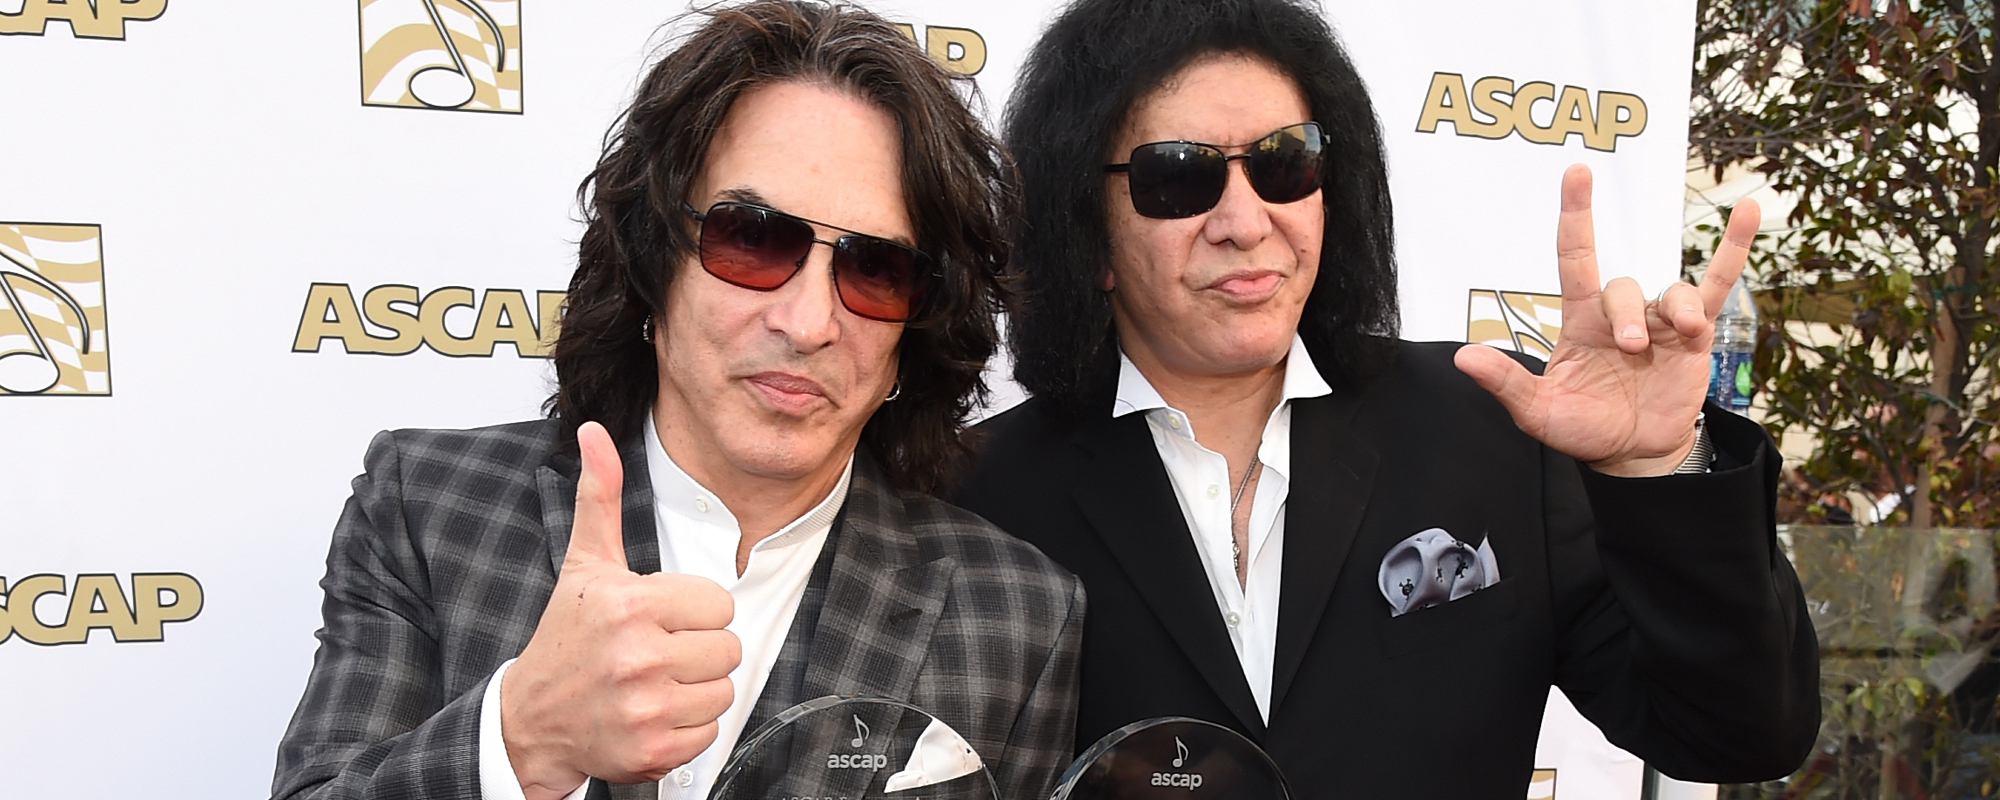 Gene Simmons and Paul Stanley Give Praise For Green Day Cover Of “Rock And Roll All Nite”